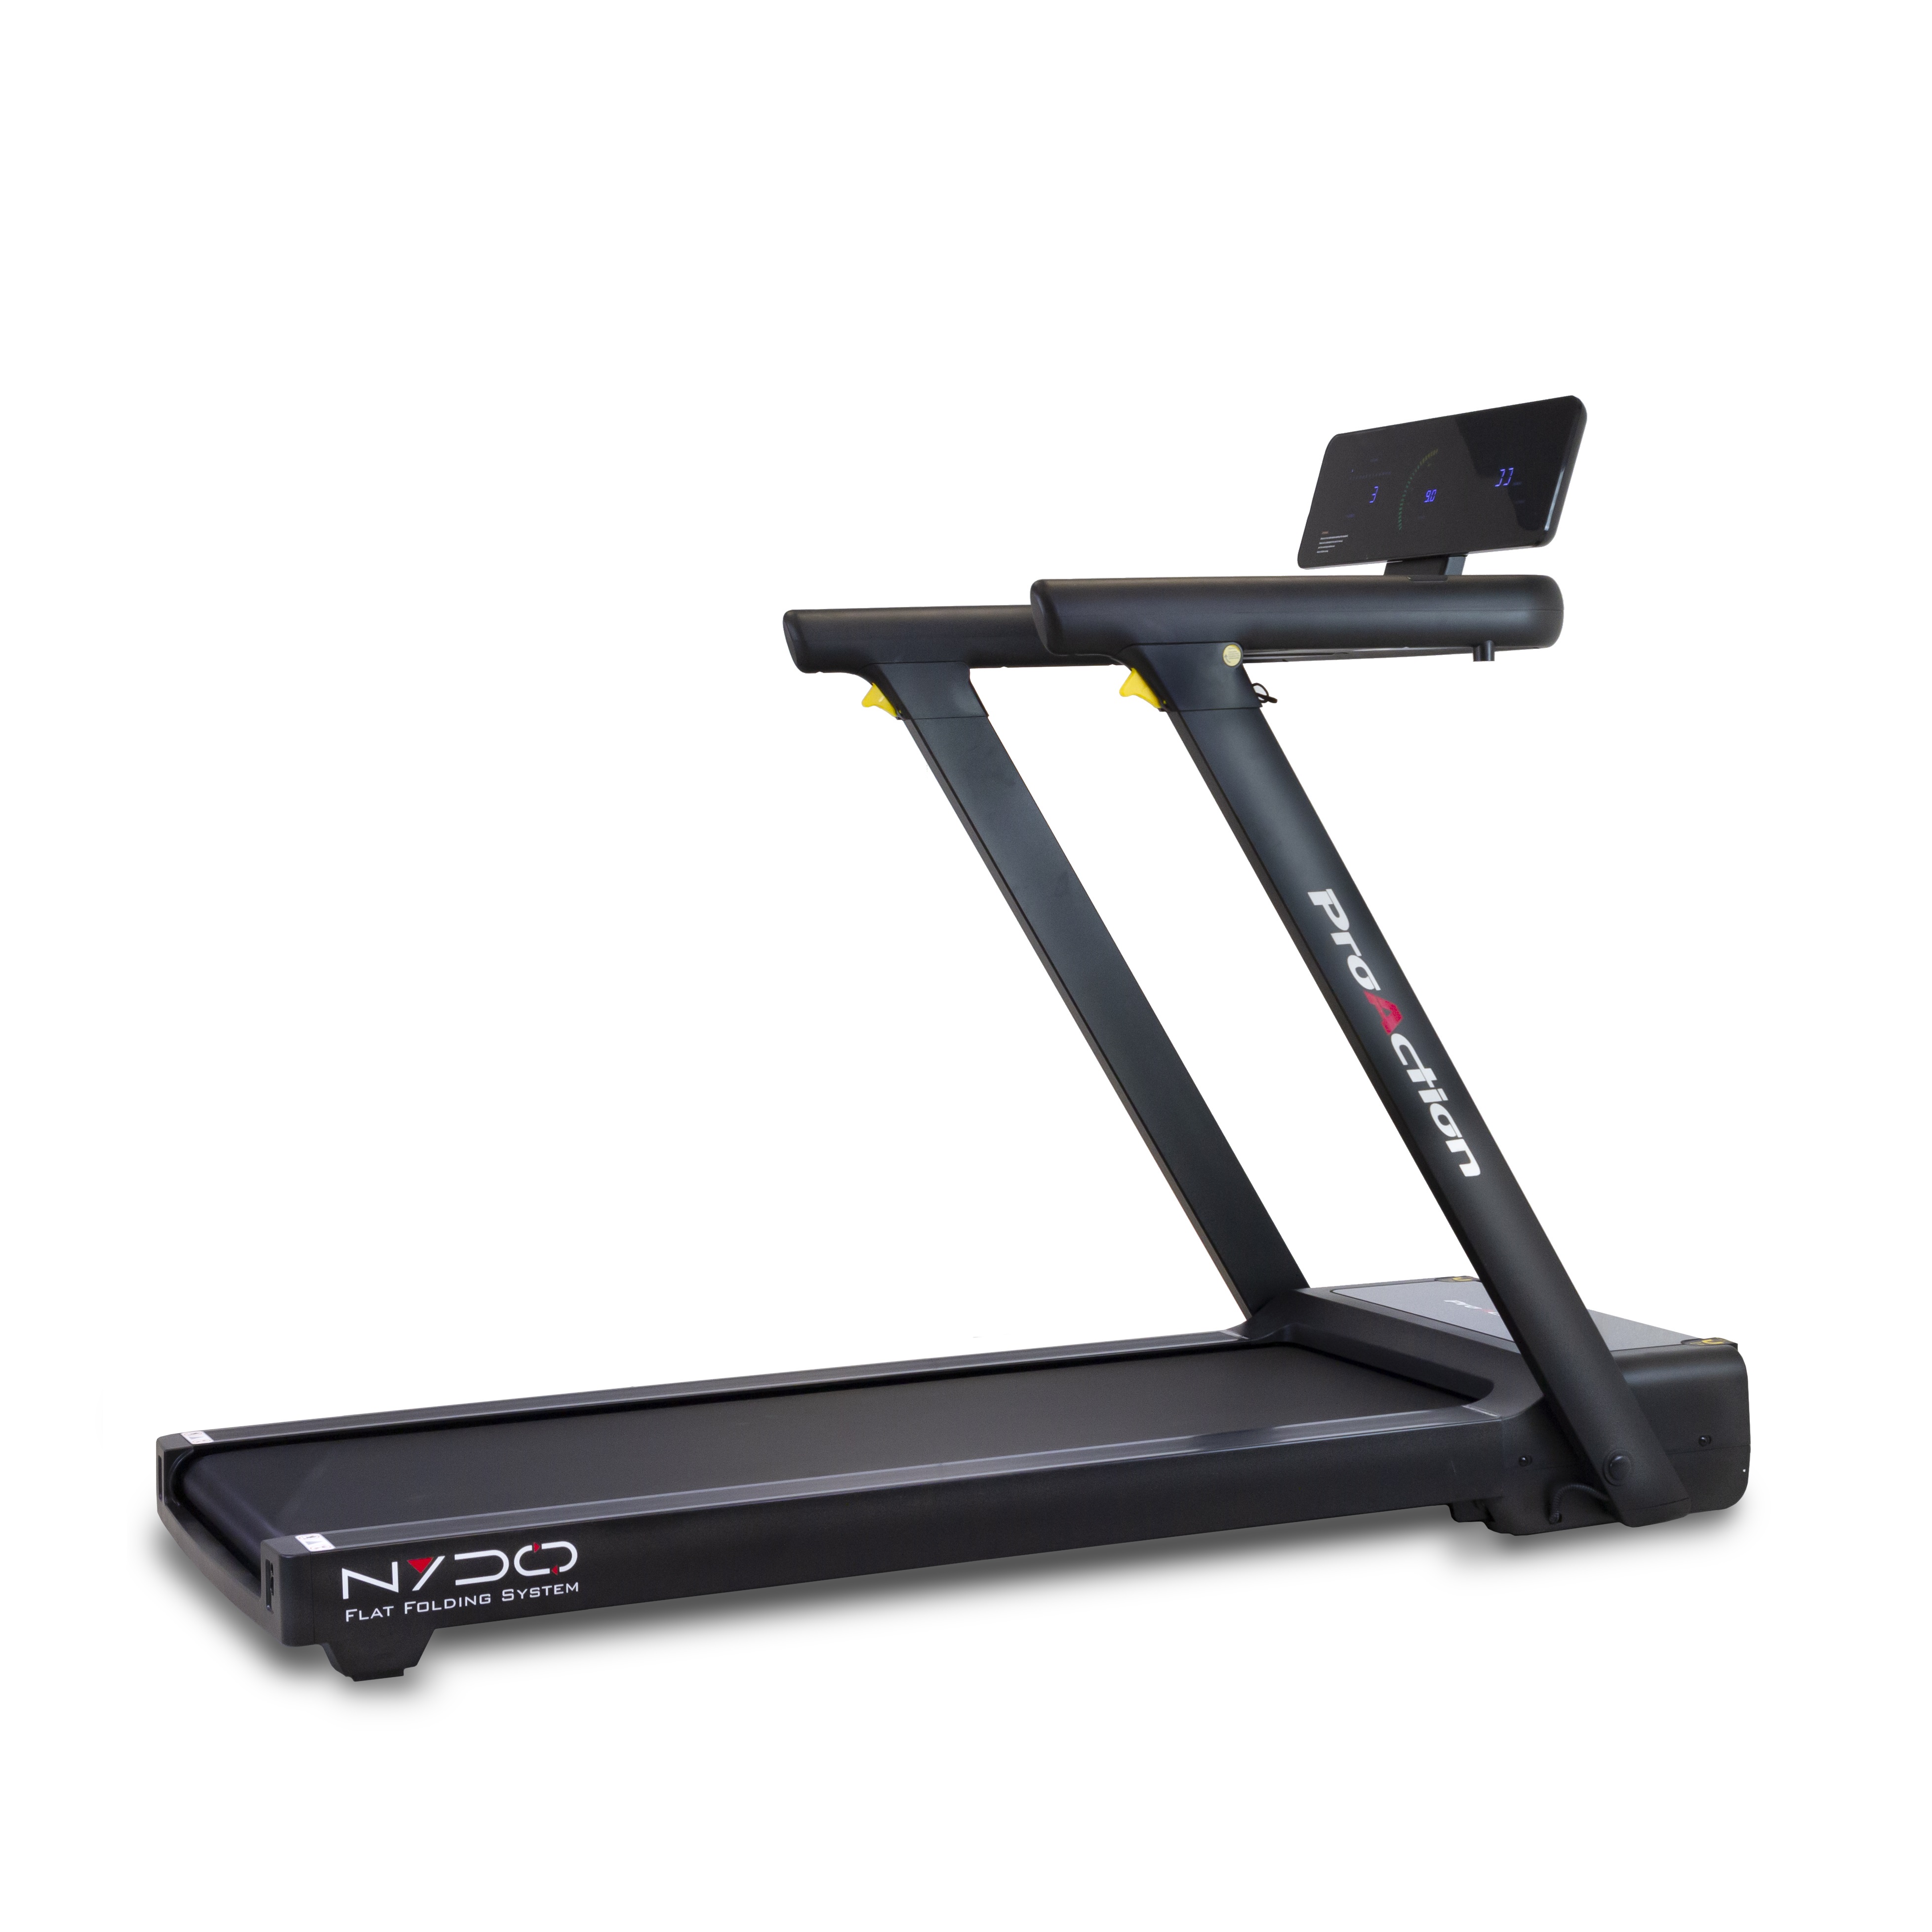 Compact NYDO G6540 Bh fitness - FitnessBoutique